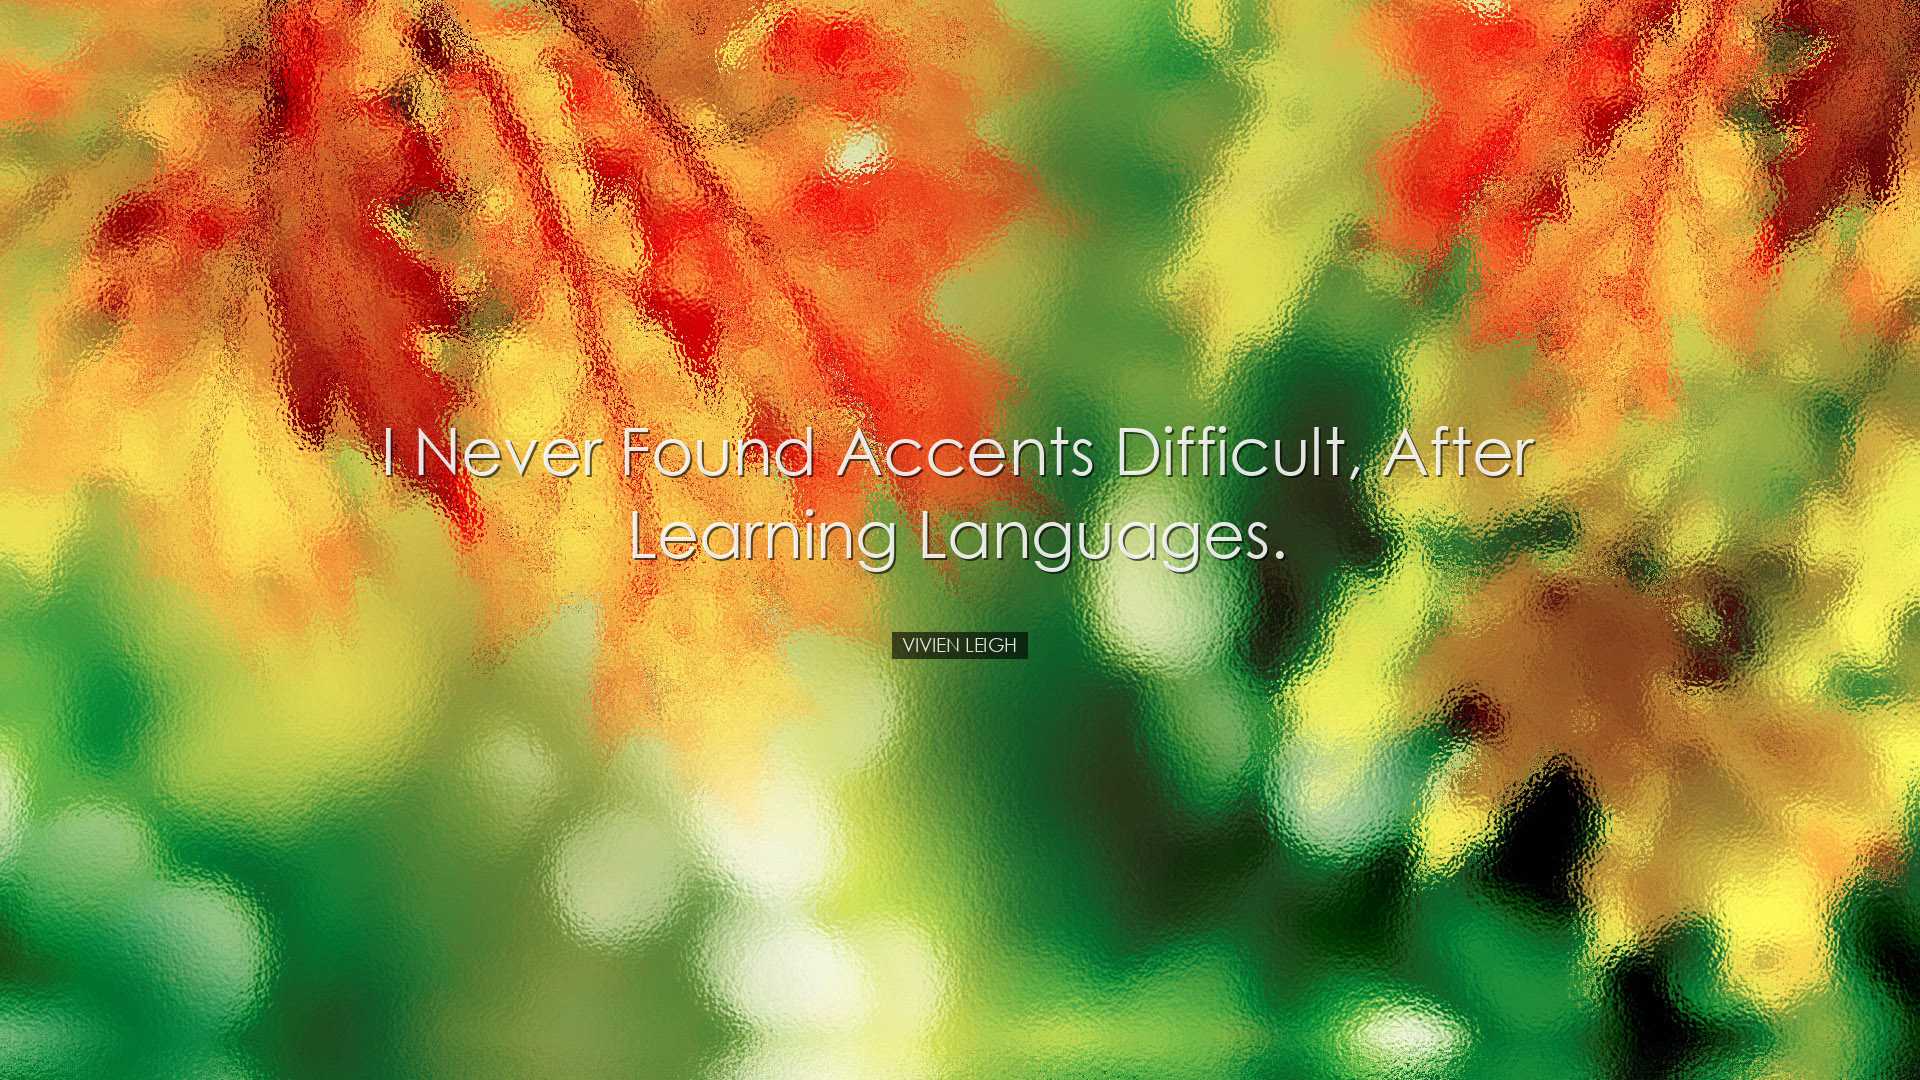 I never found accents difficult, after learning languages. - Vivie